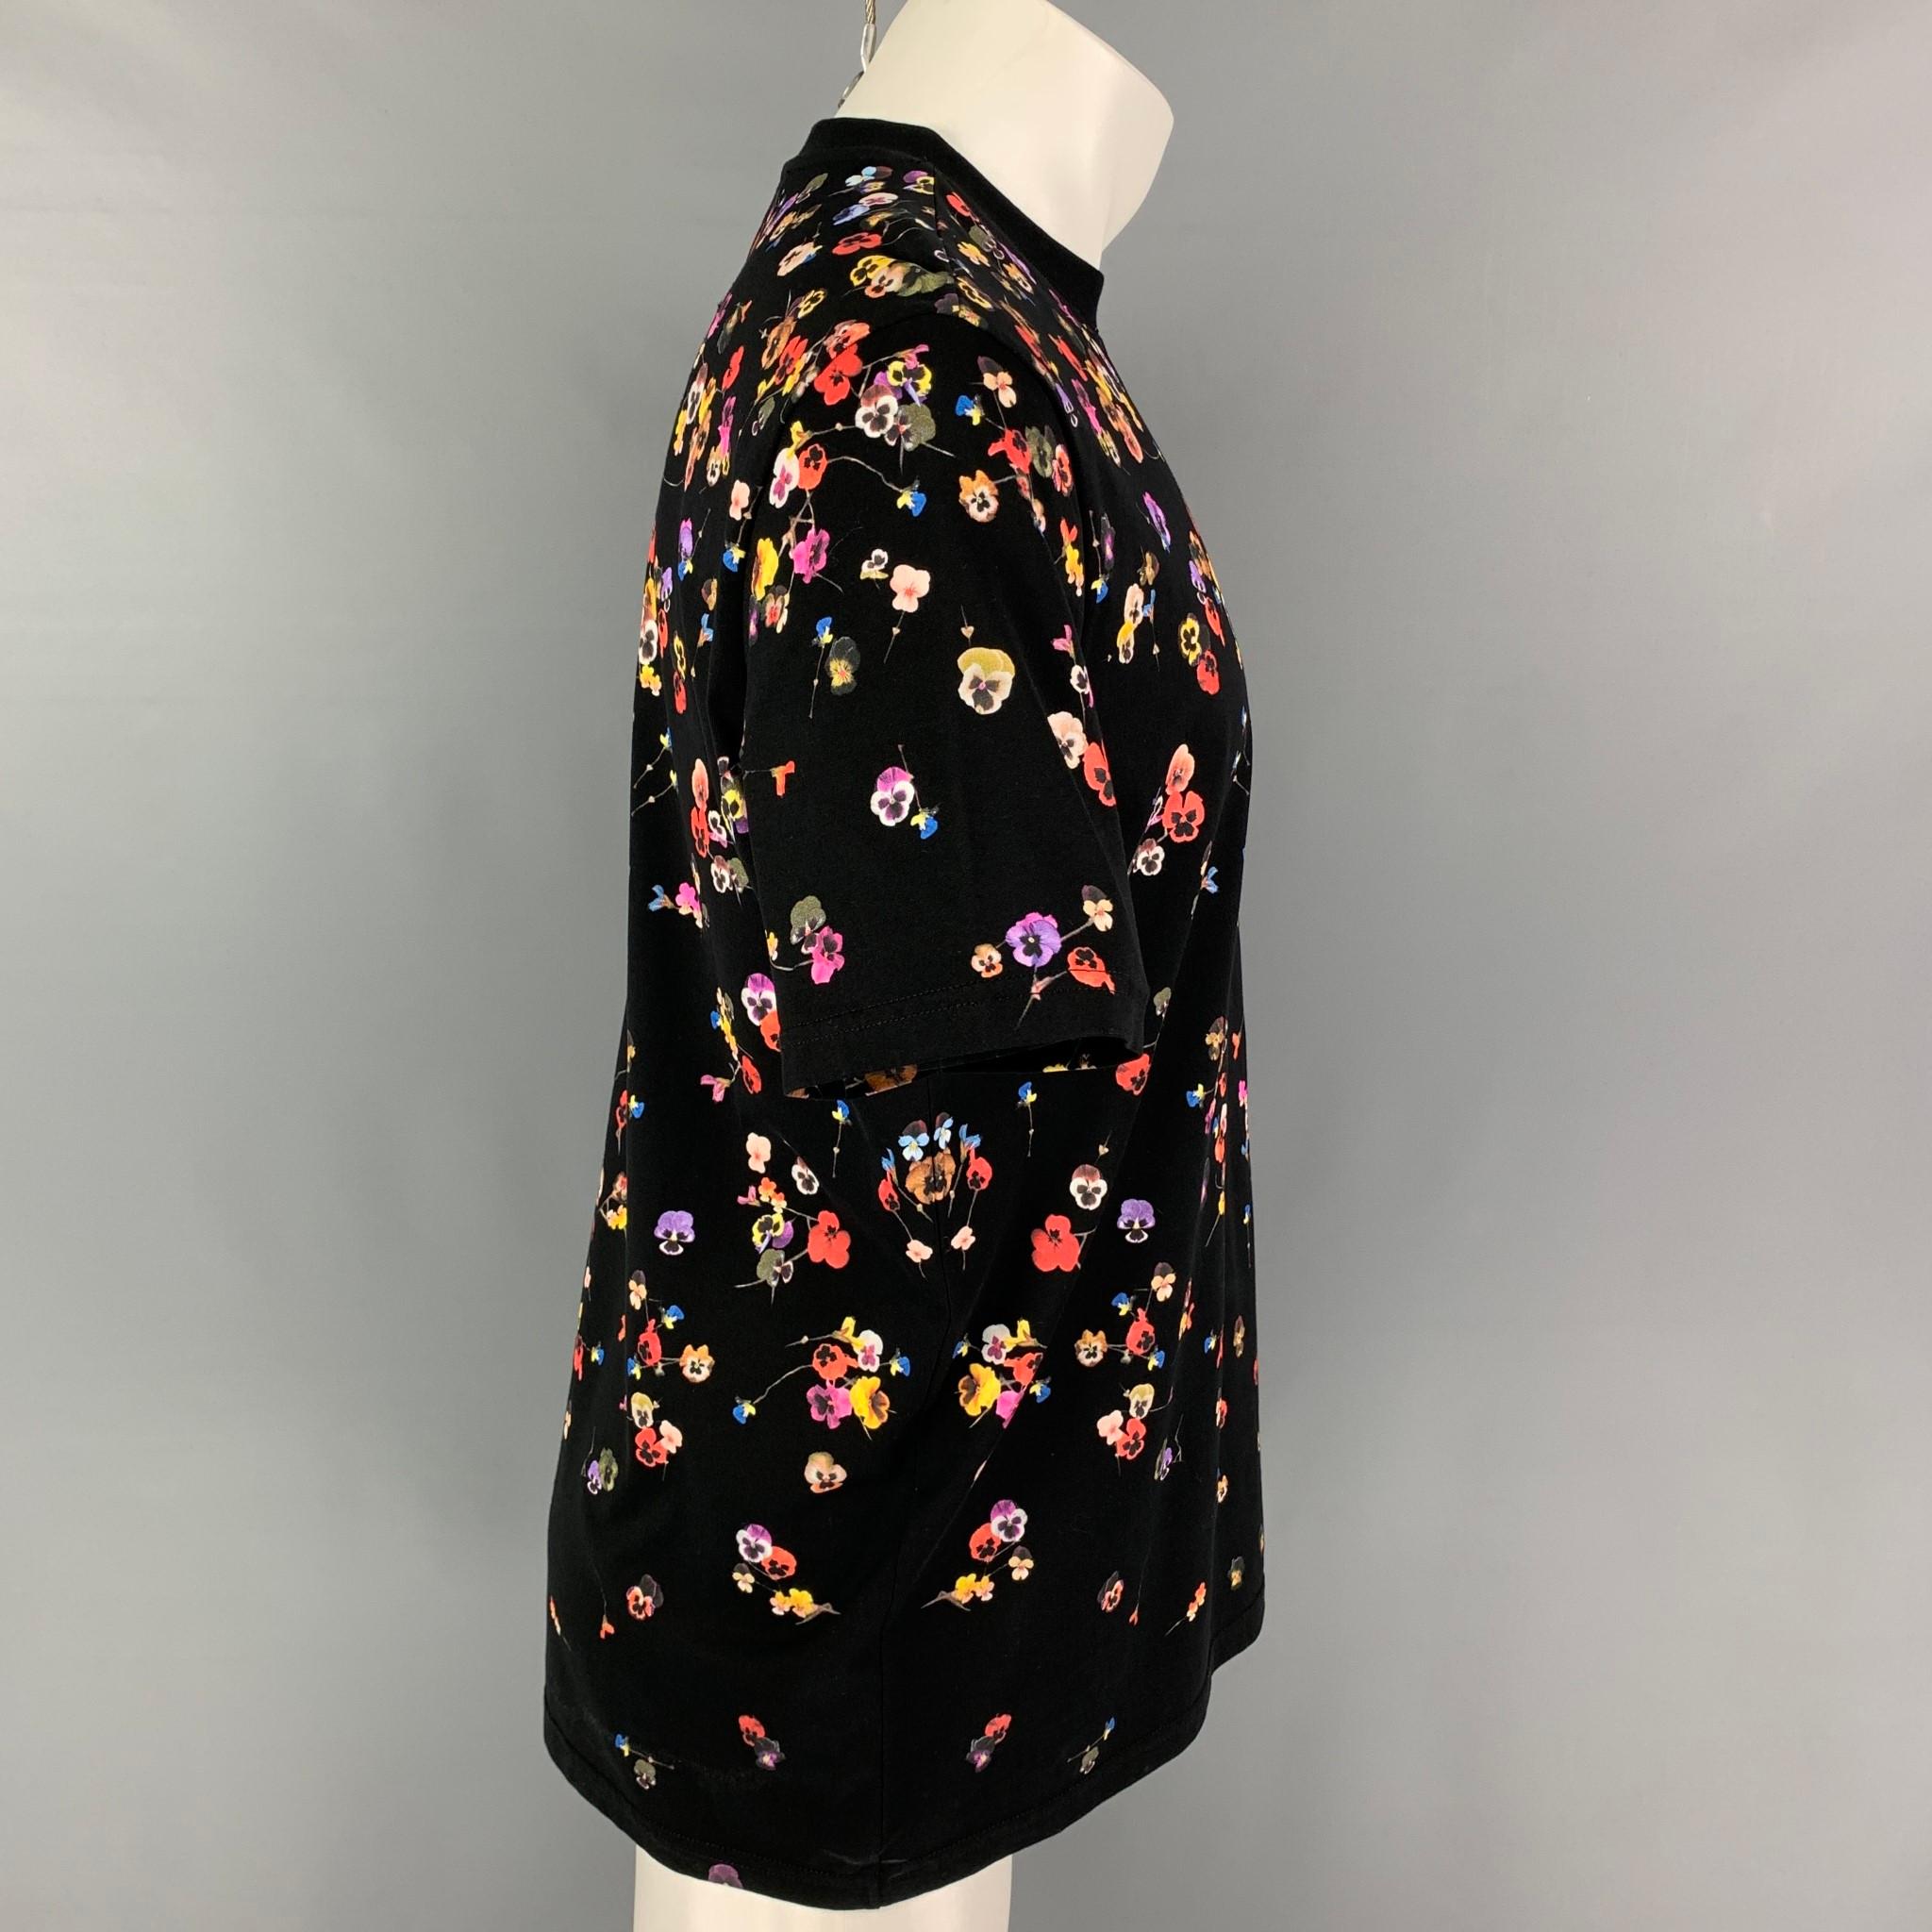 GIVENCHY t-shirt comes in a black cotton featuring a loose fit, multi-color floral print throughout, and a crew-neck. Made in Portugal. 

Excellent Pre-Owned Condition.
Marked: XS

Measurements:

Shoulder: 18.5 in.
Chest: 44 in.
Sleeve: 9.75